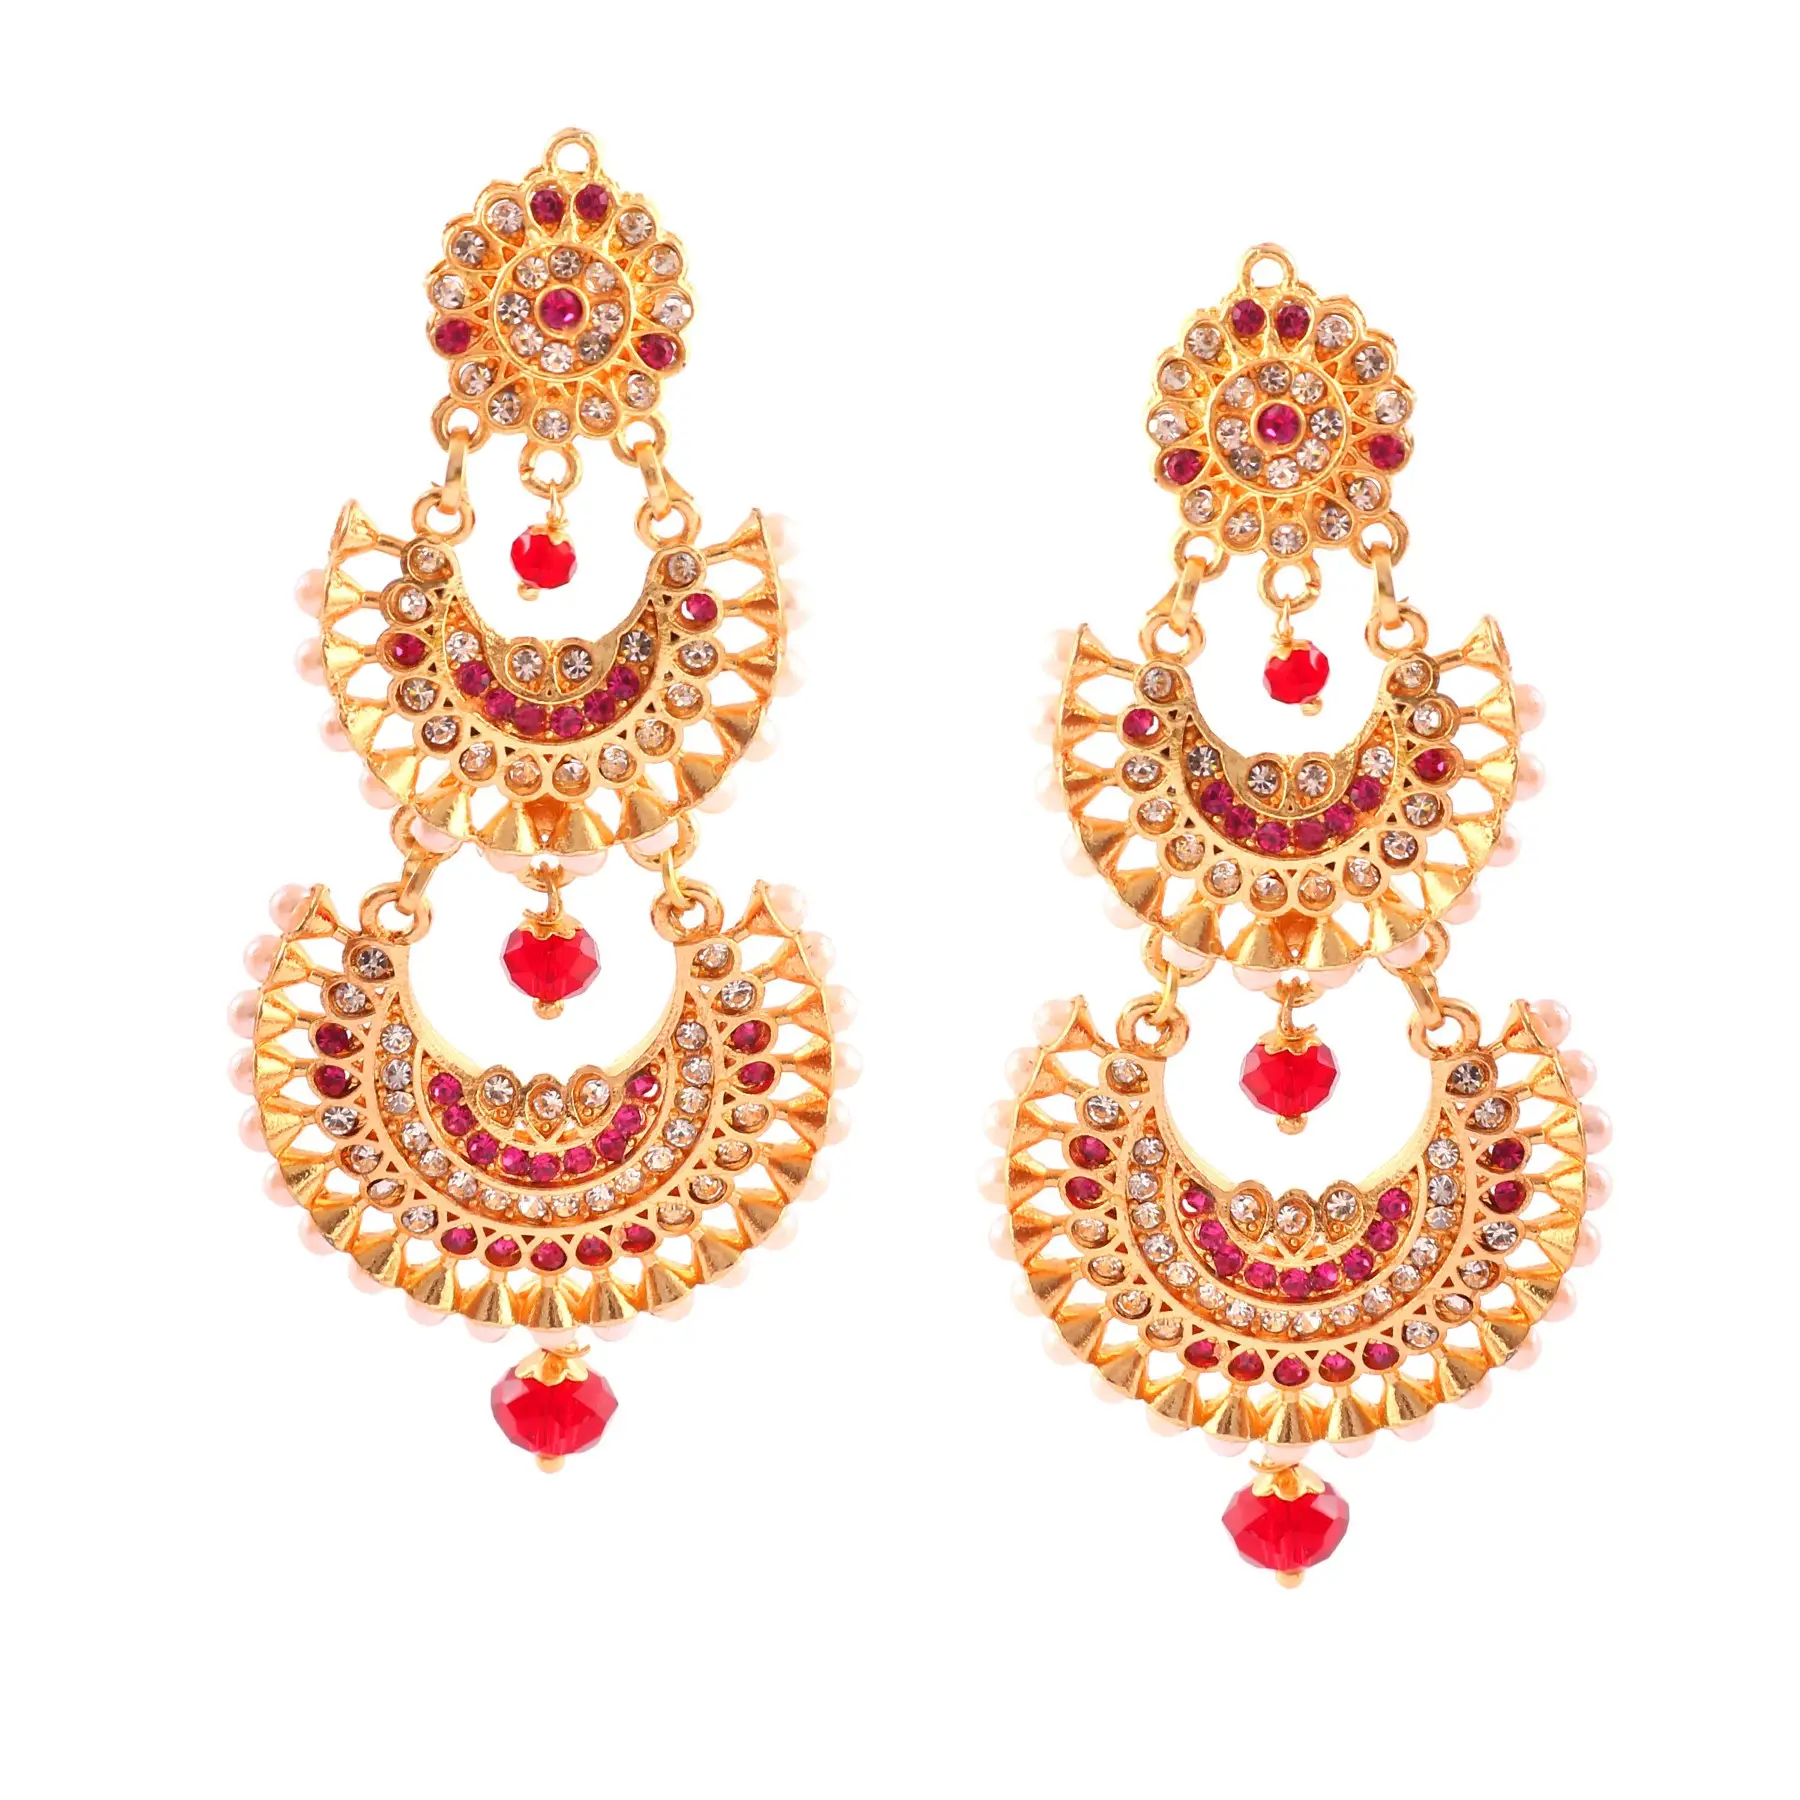 Gold Plated Multicolor 3 Layer Chandbali Earring For Women's Copper Chandbali Earring Handmade Bulk Product